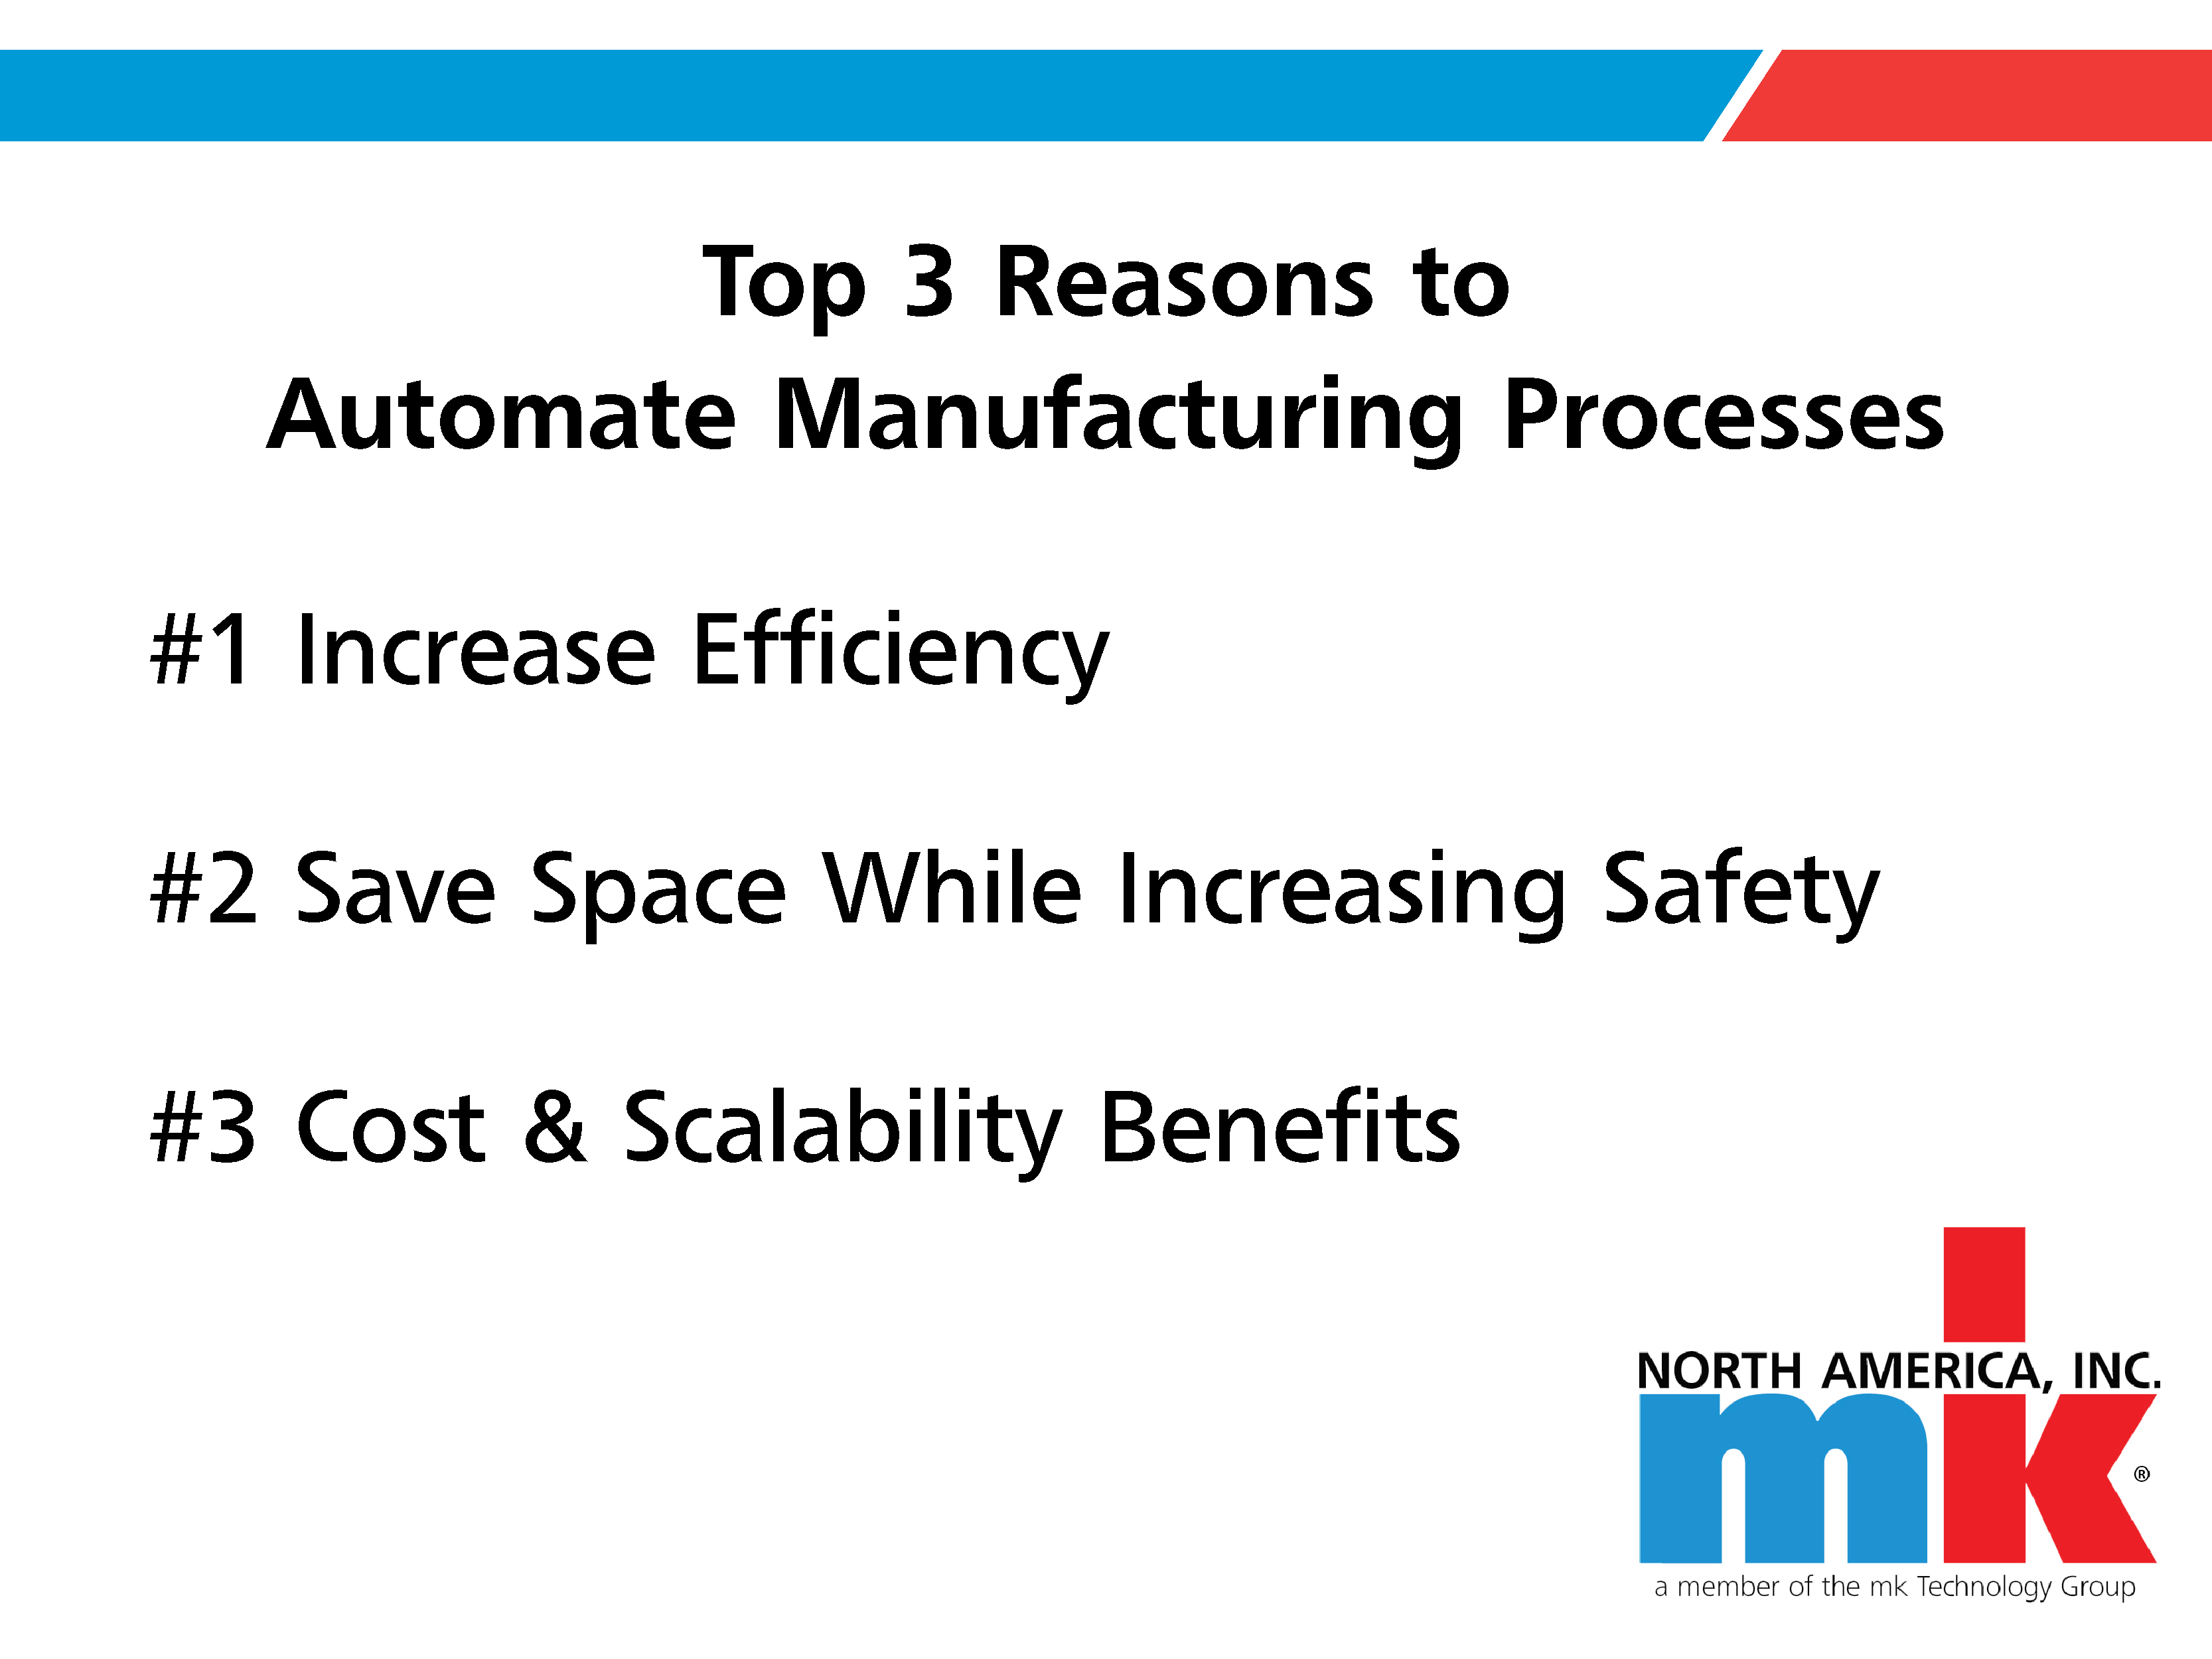 Automate manufacturing processes